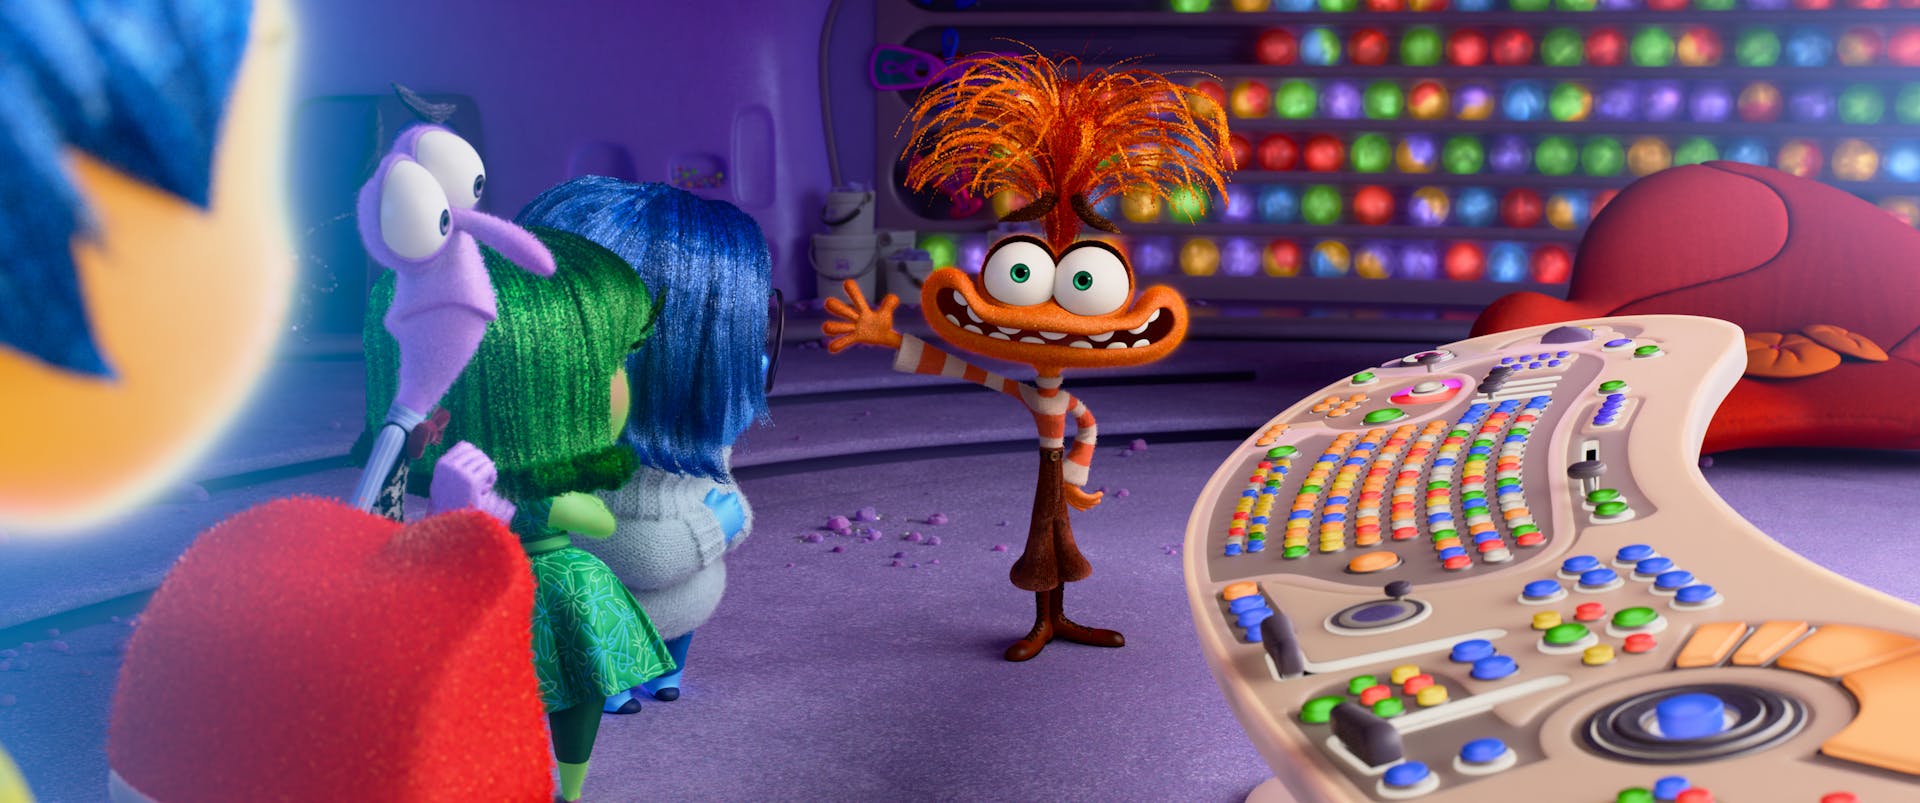 Inside Out 2 - Family Fun Day